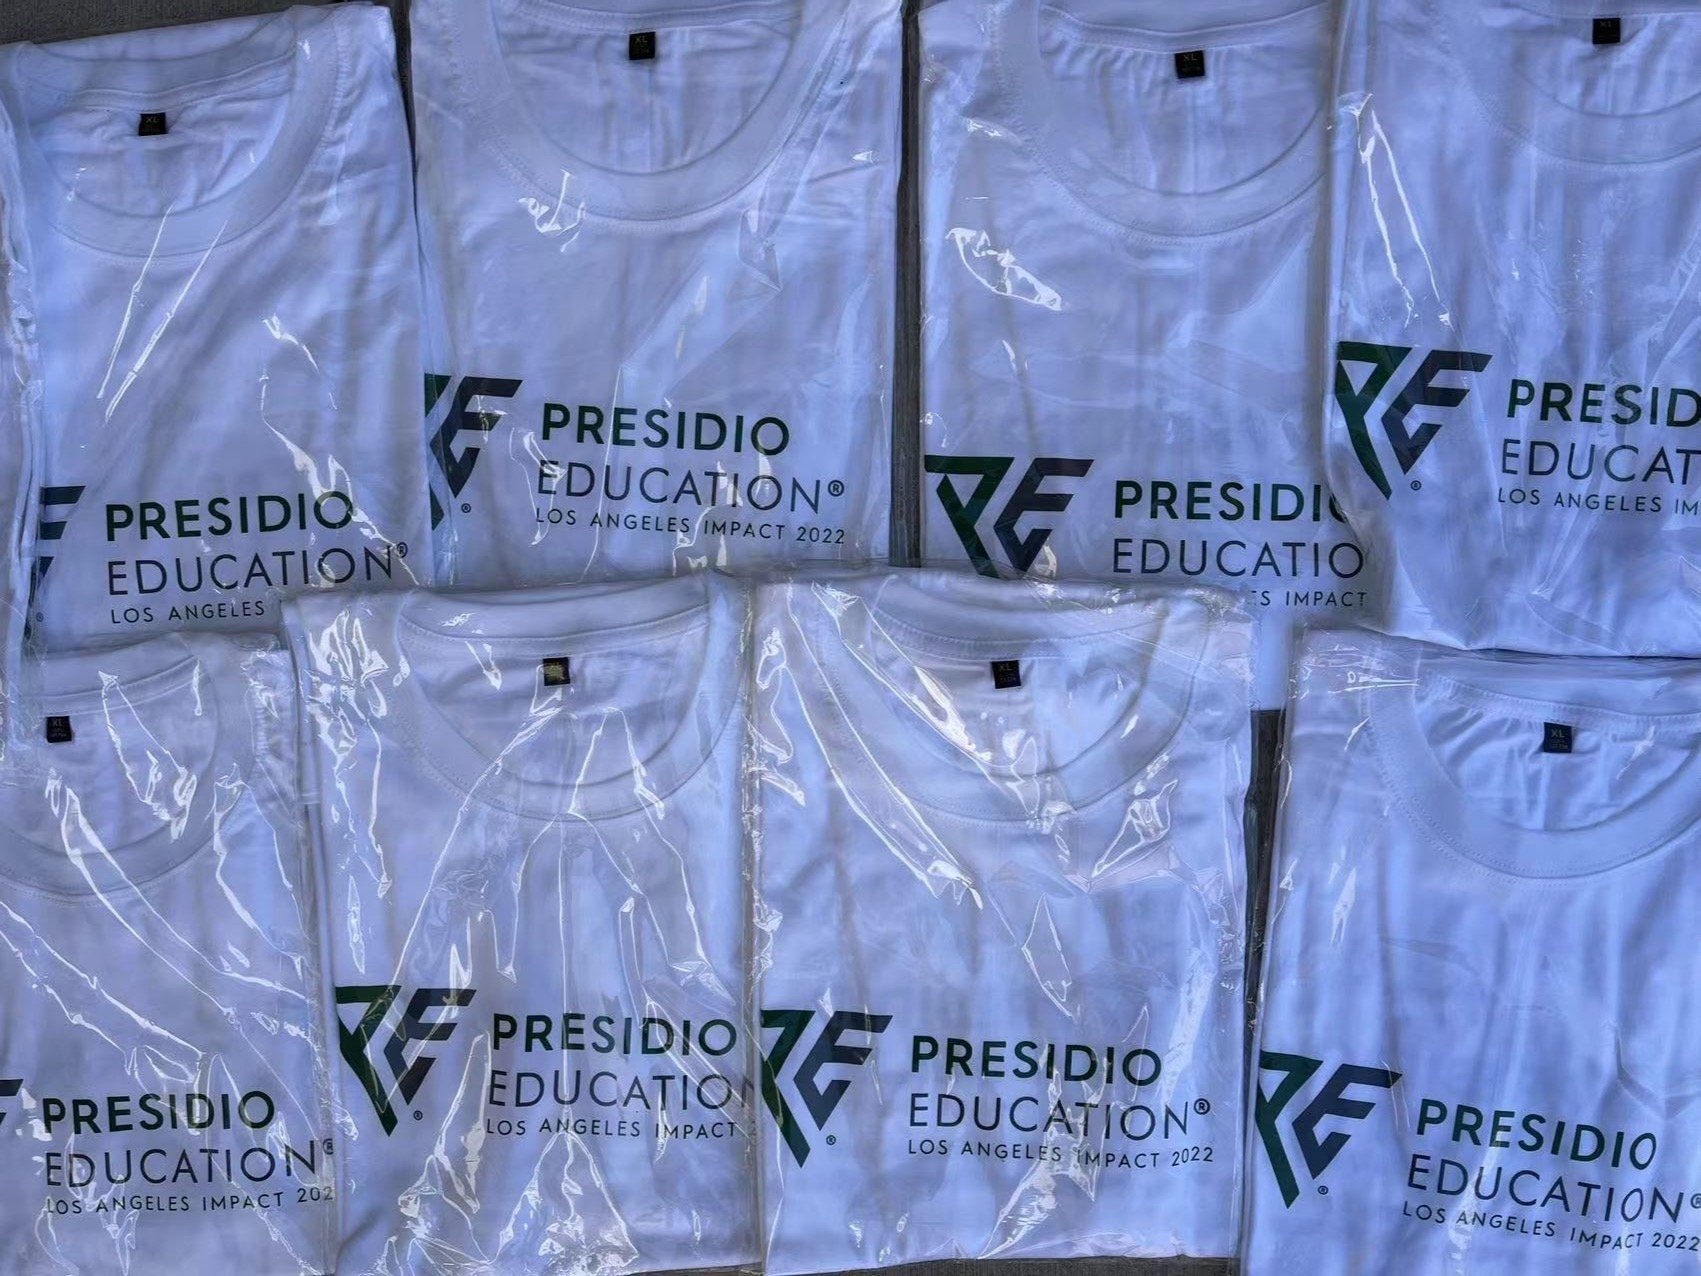   Presidio Education®  t-shirts. Photograph by  Mary Liu, Sustainability Team Gender Equality Leader , 2022. 